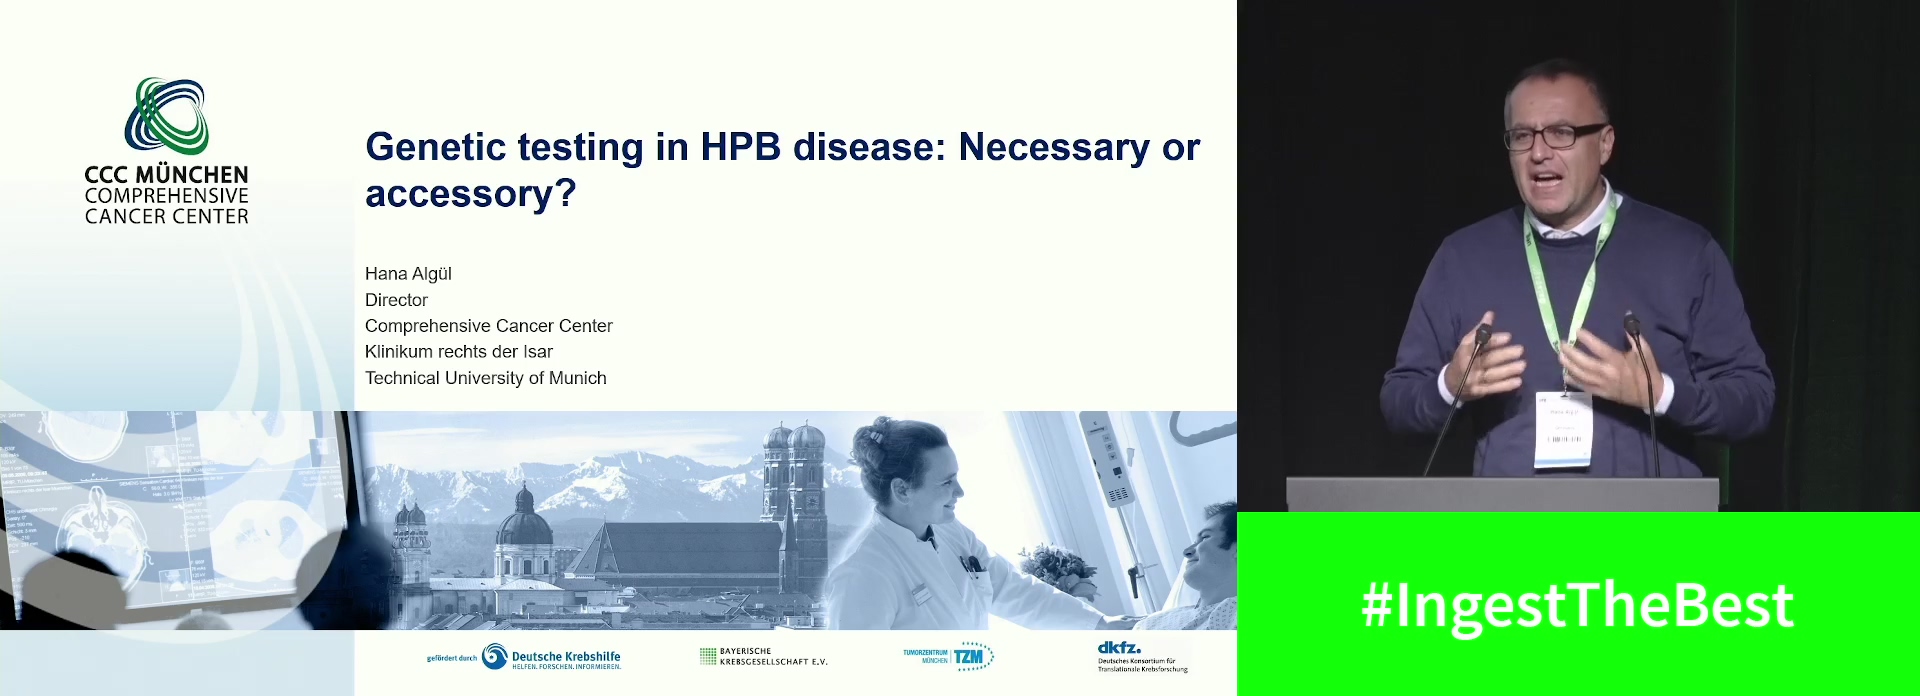 Genetic testing in HPB disease: Necessary or accessory?